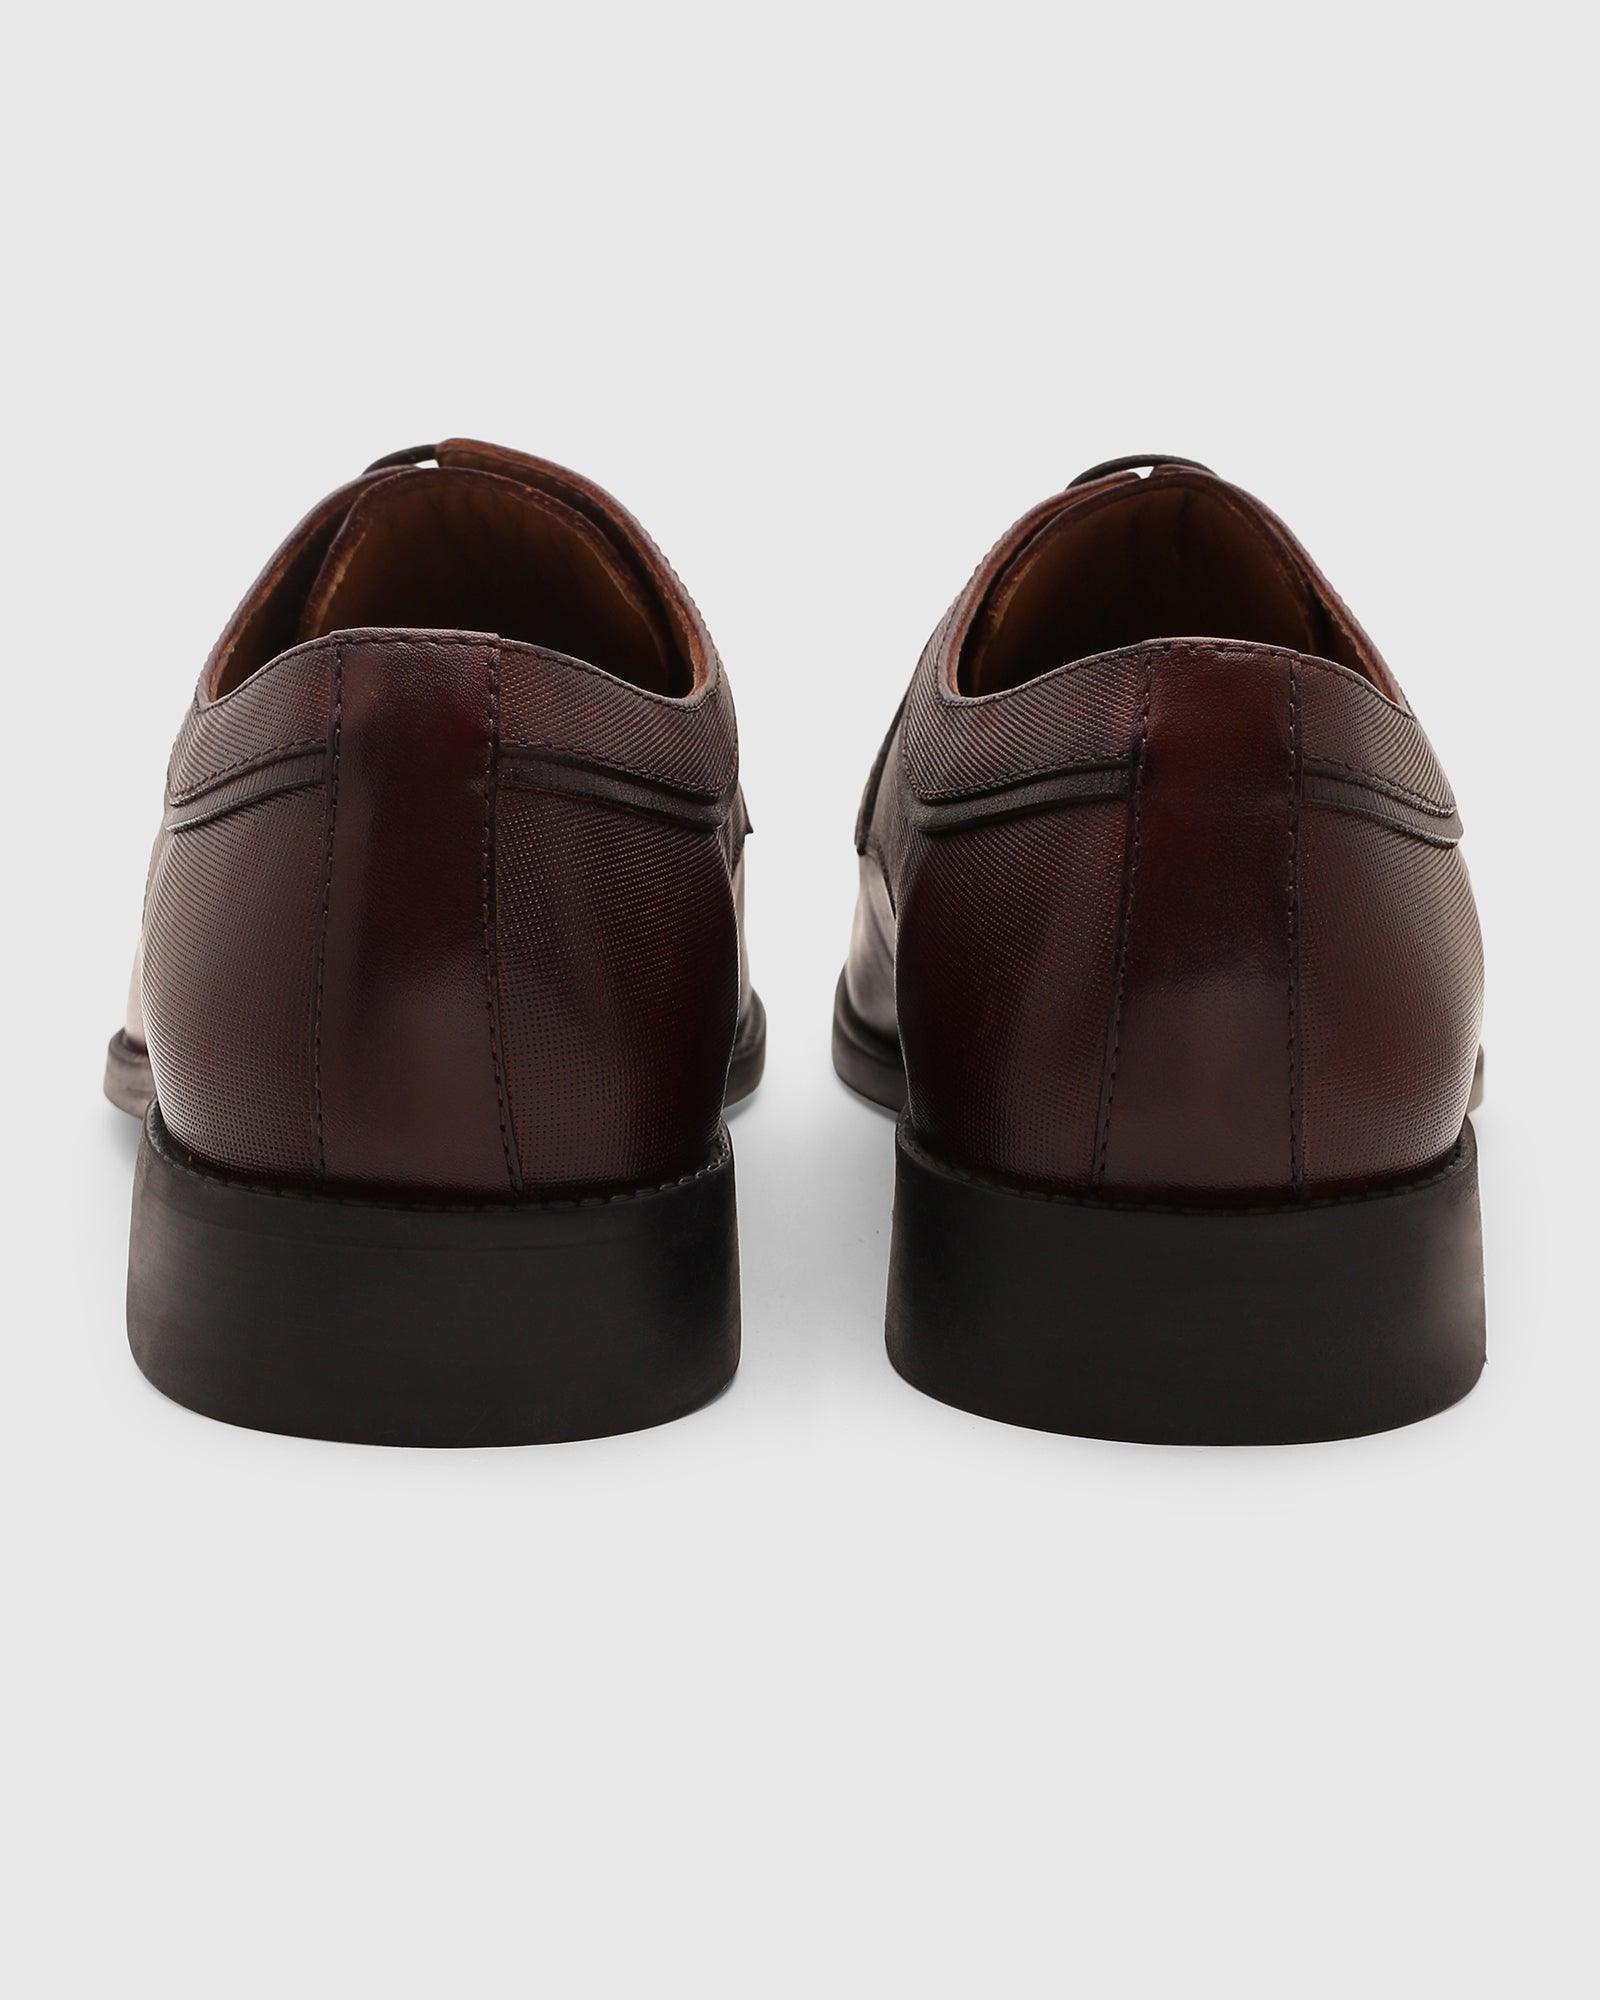 Leather Tan Solid Derby Shoes - Quddor